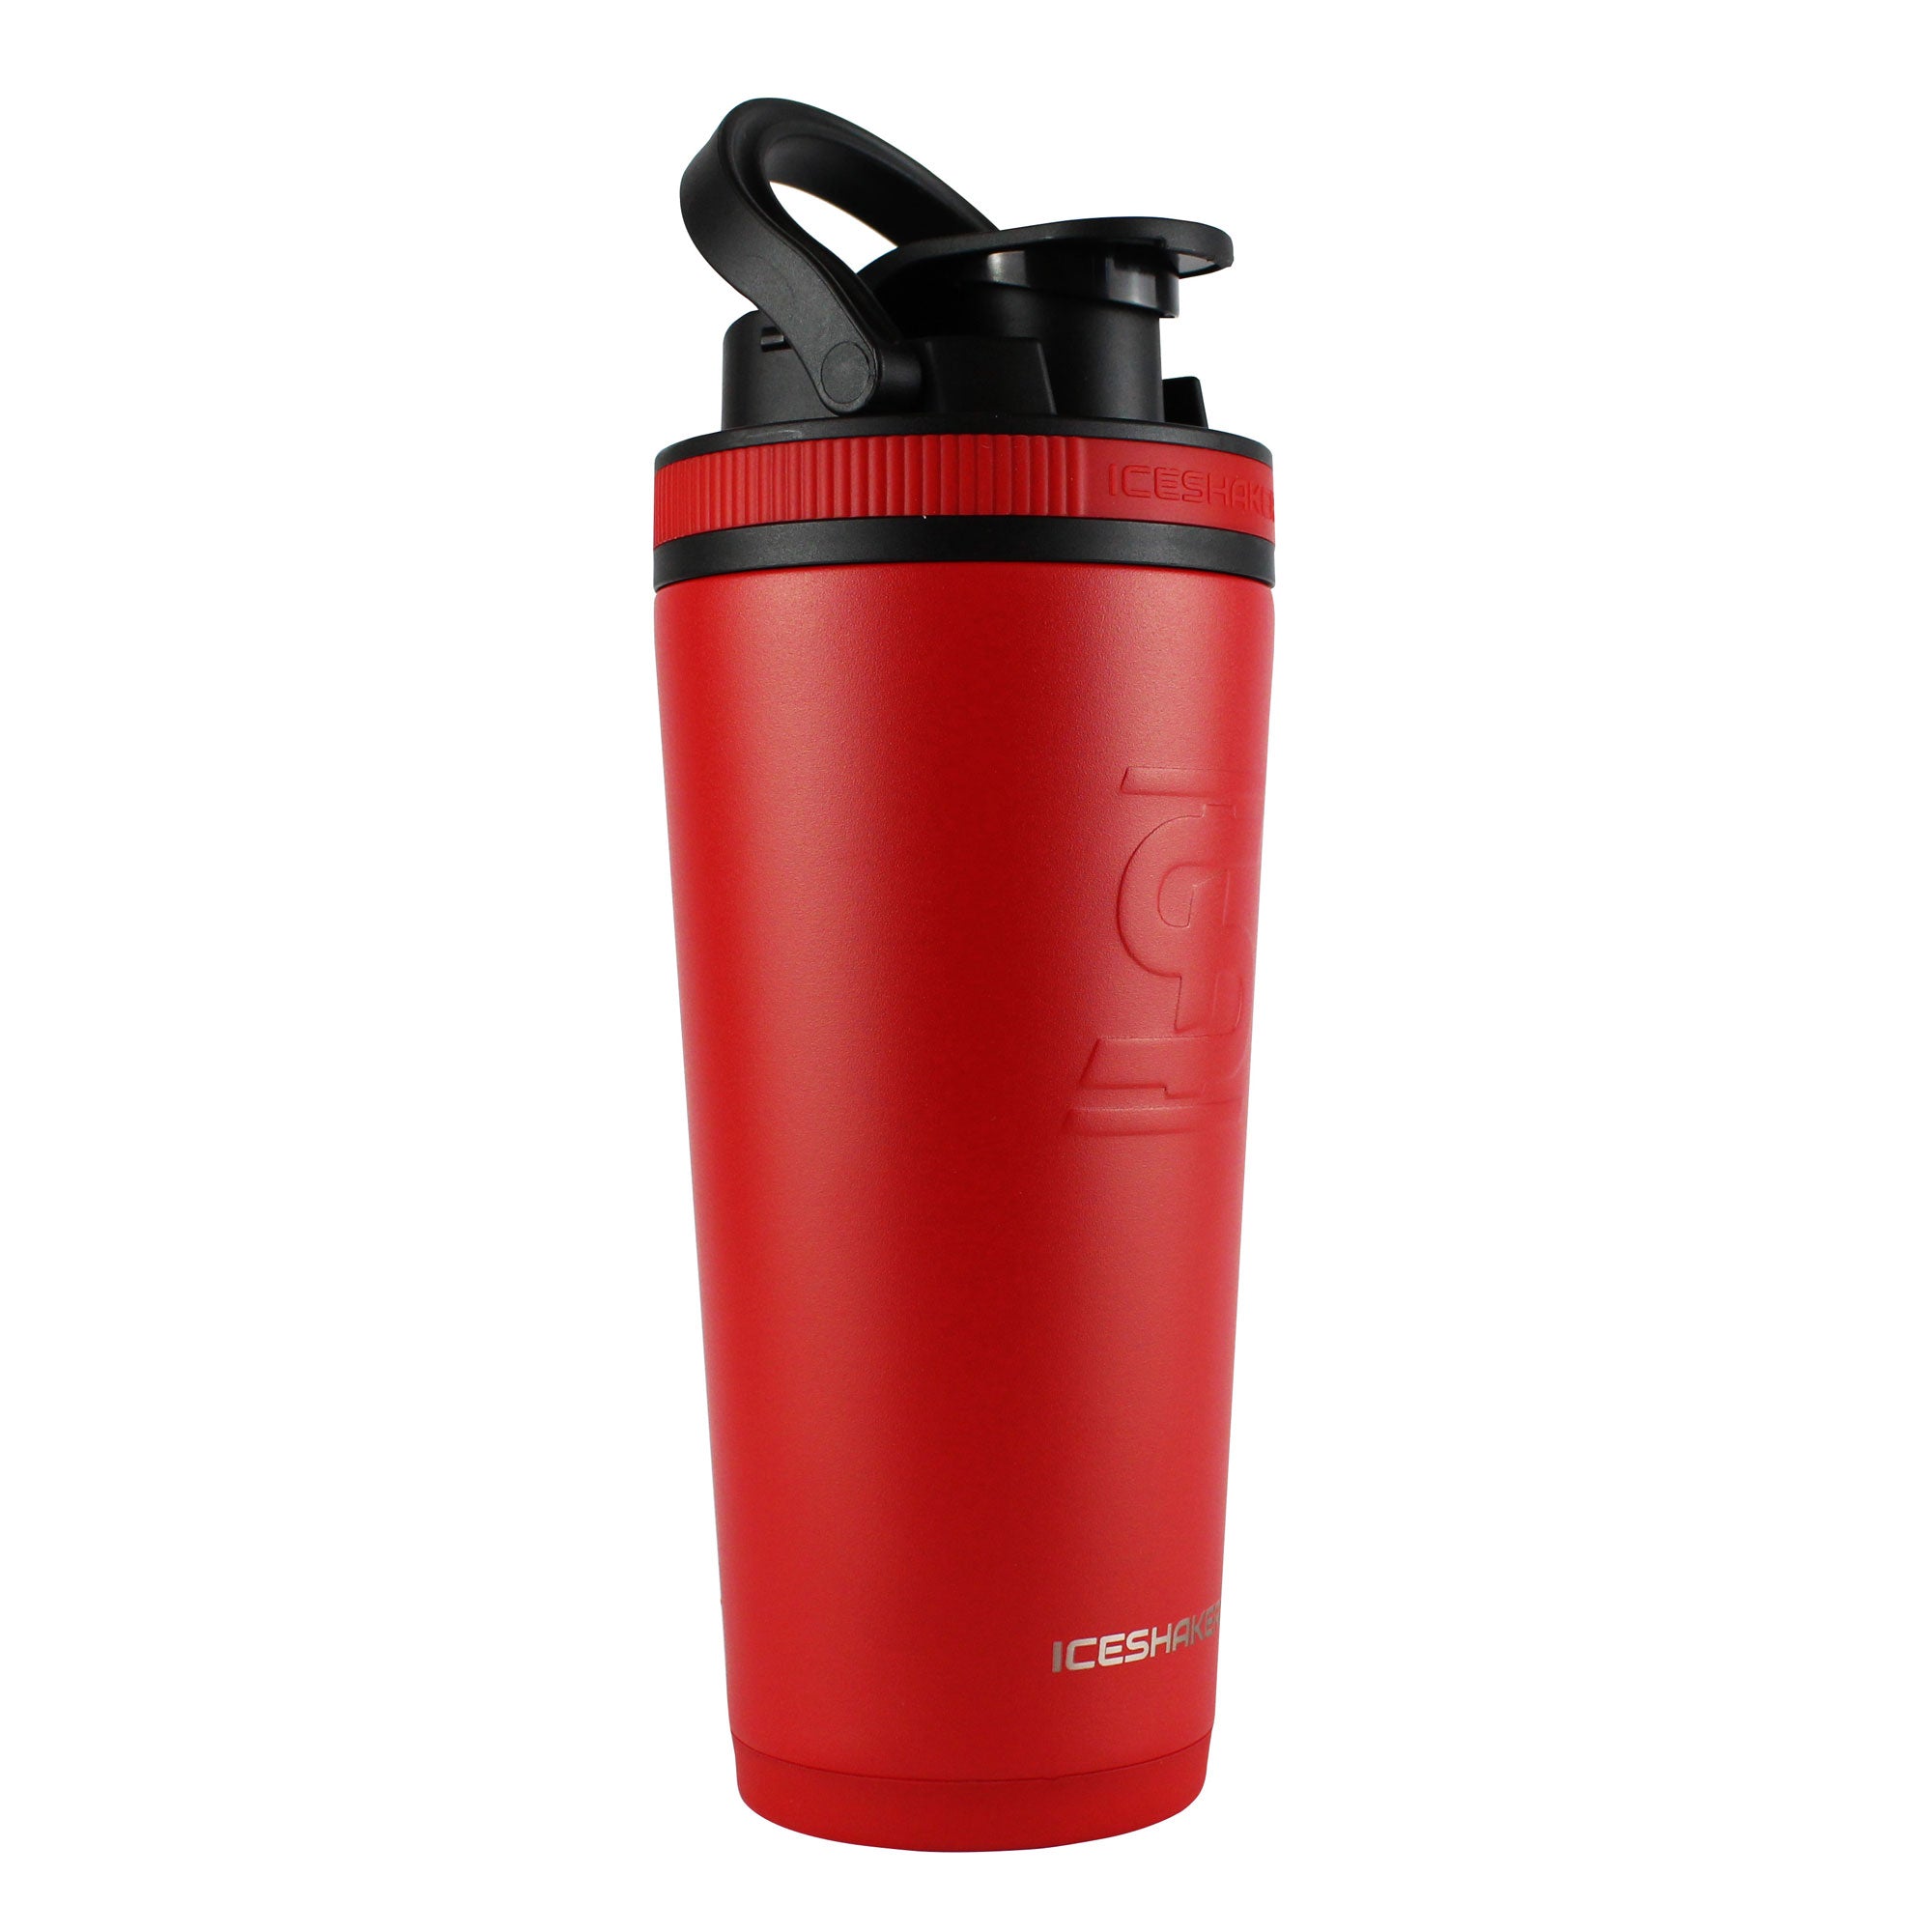 Reps for Responders 26oz Ice Shaker - Red